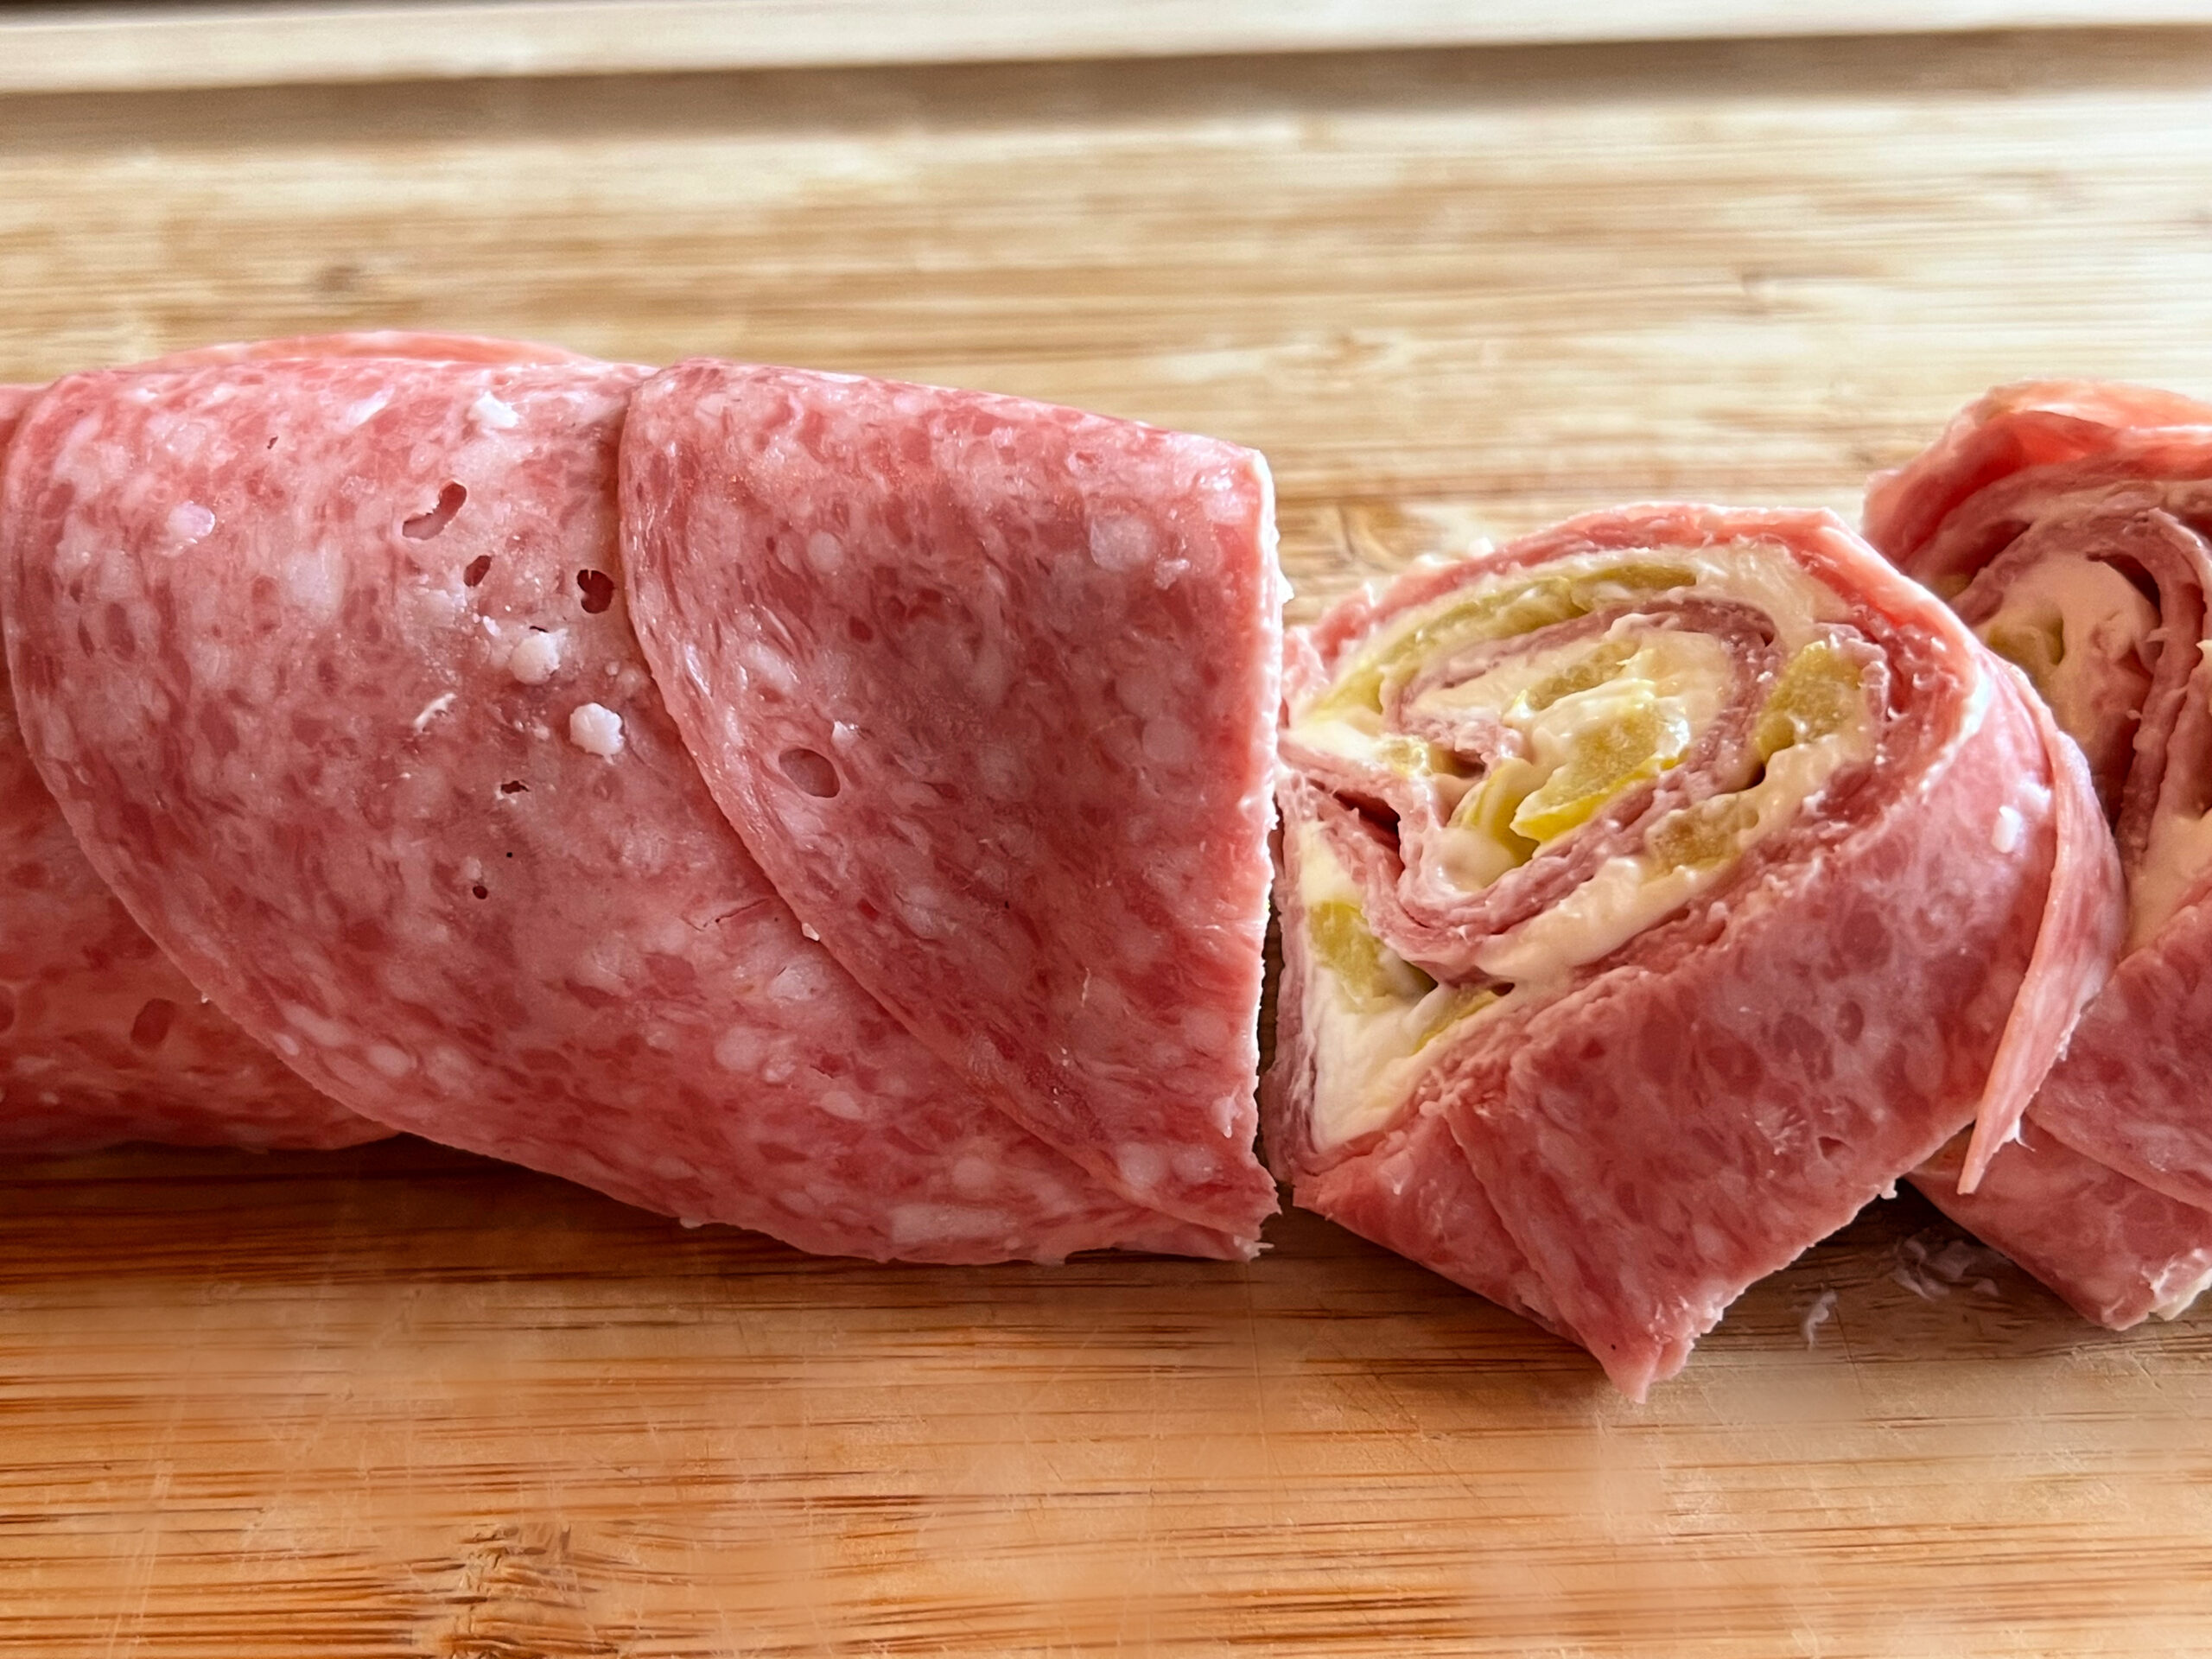 This photo shows the rolled up salami being sliced into round bite size pieces. 